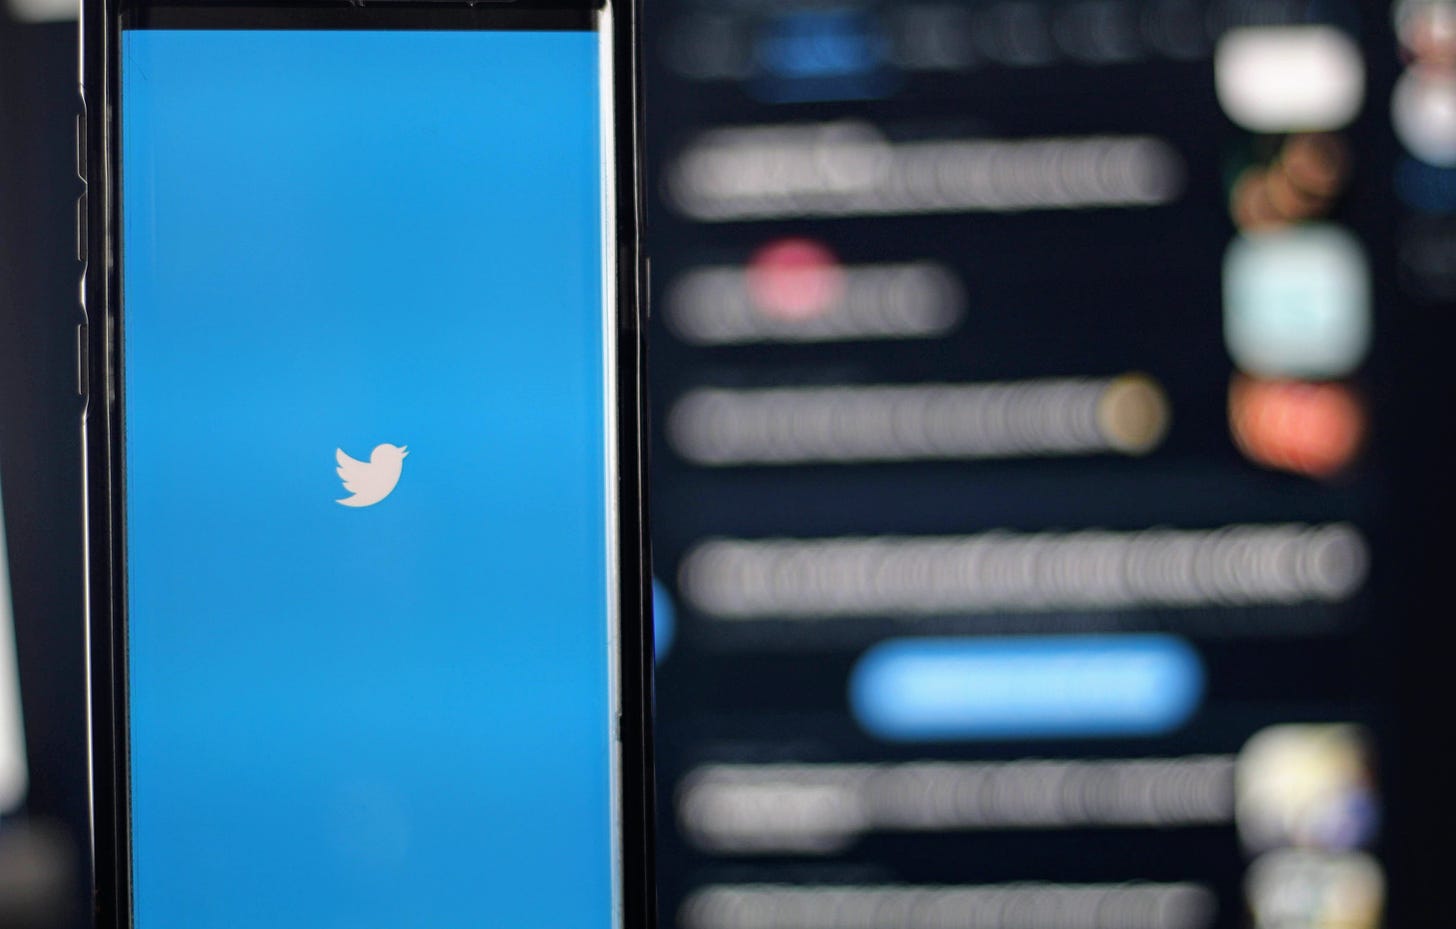 Smartphone screen showing the Twitter logo